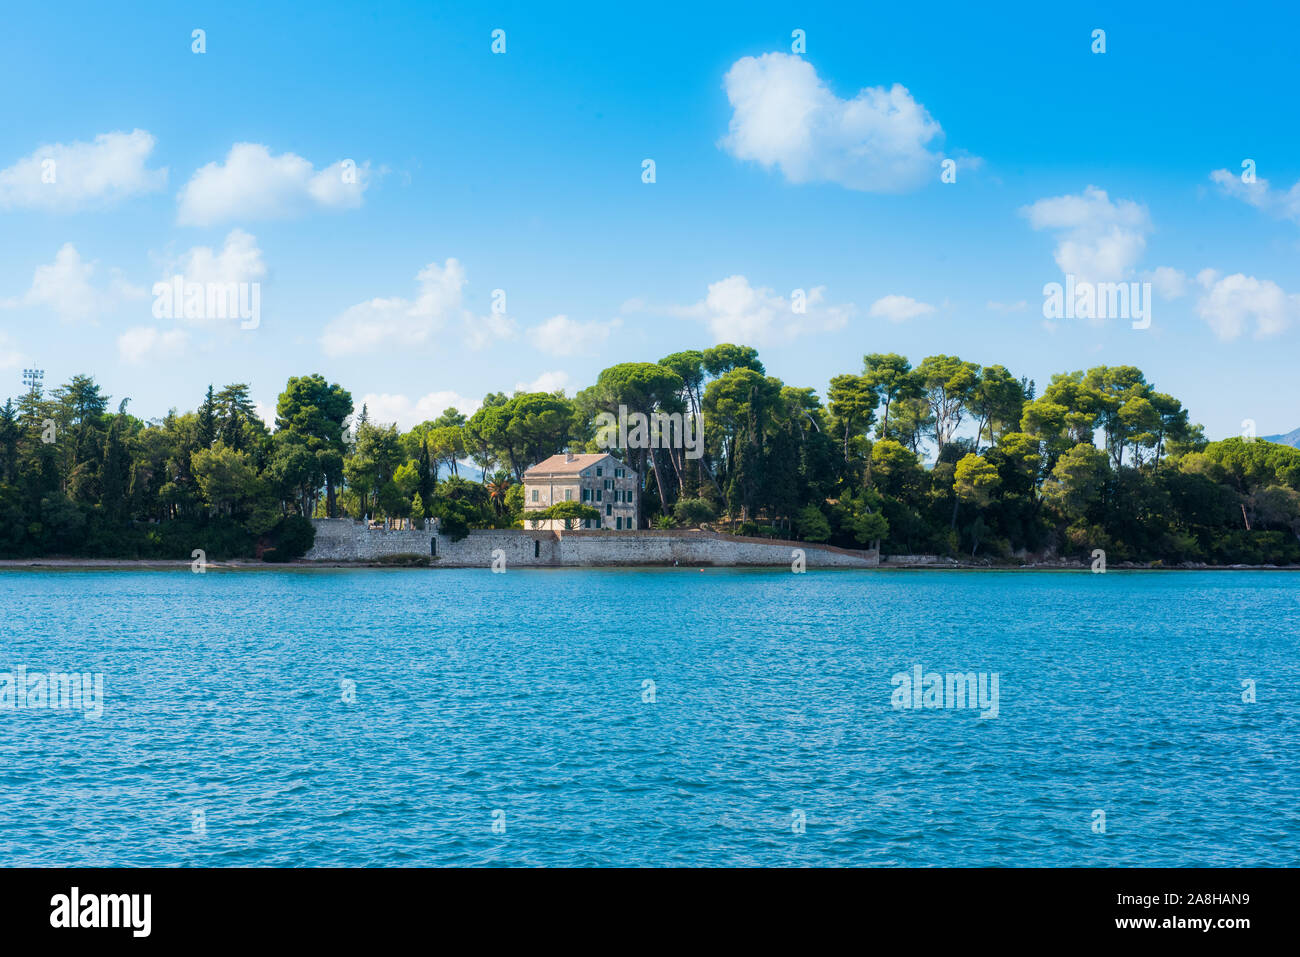 The Durrell's television house Corfu Greece Stock Photo